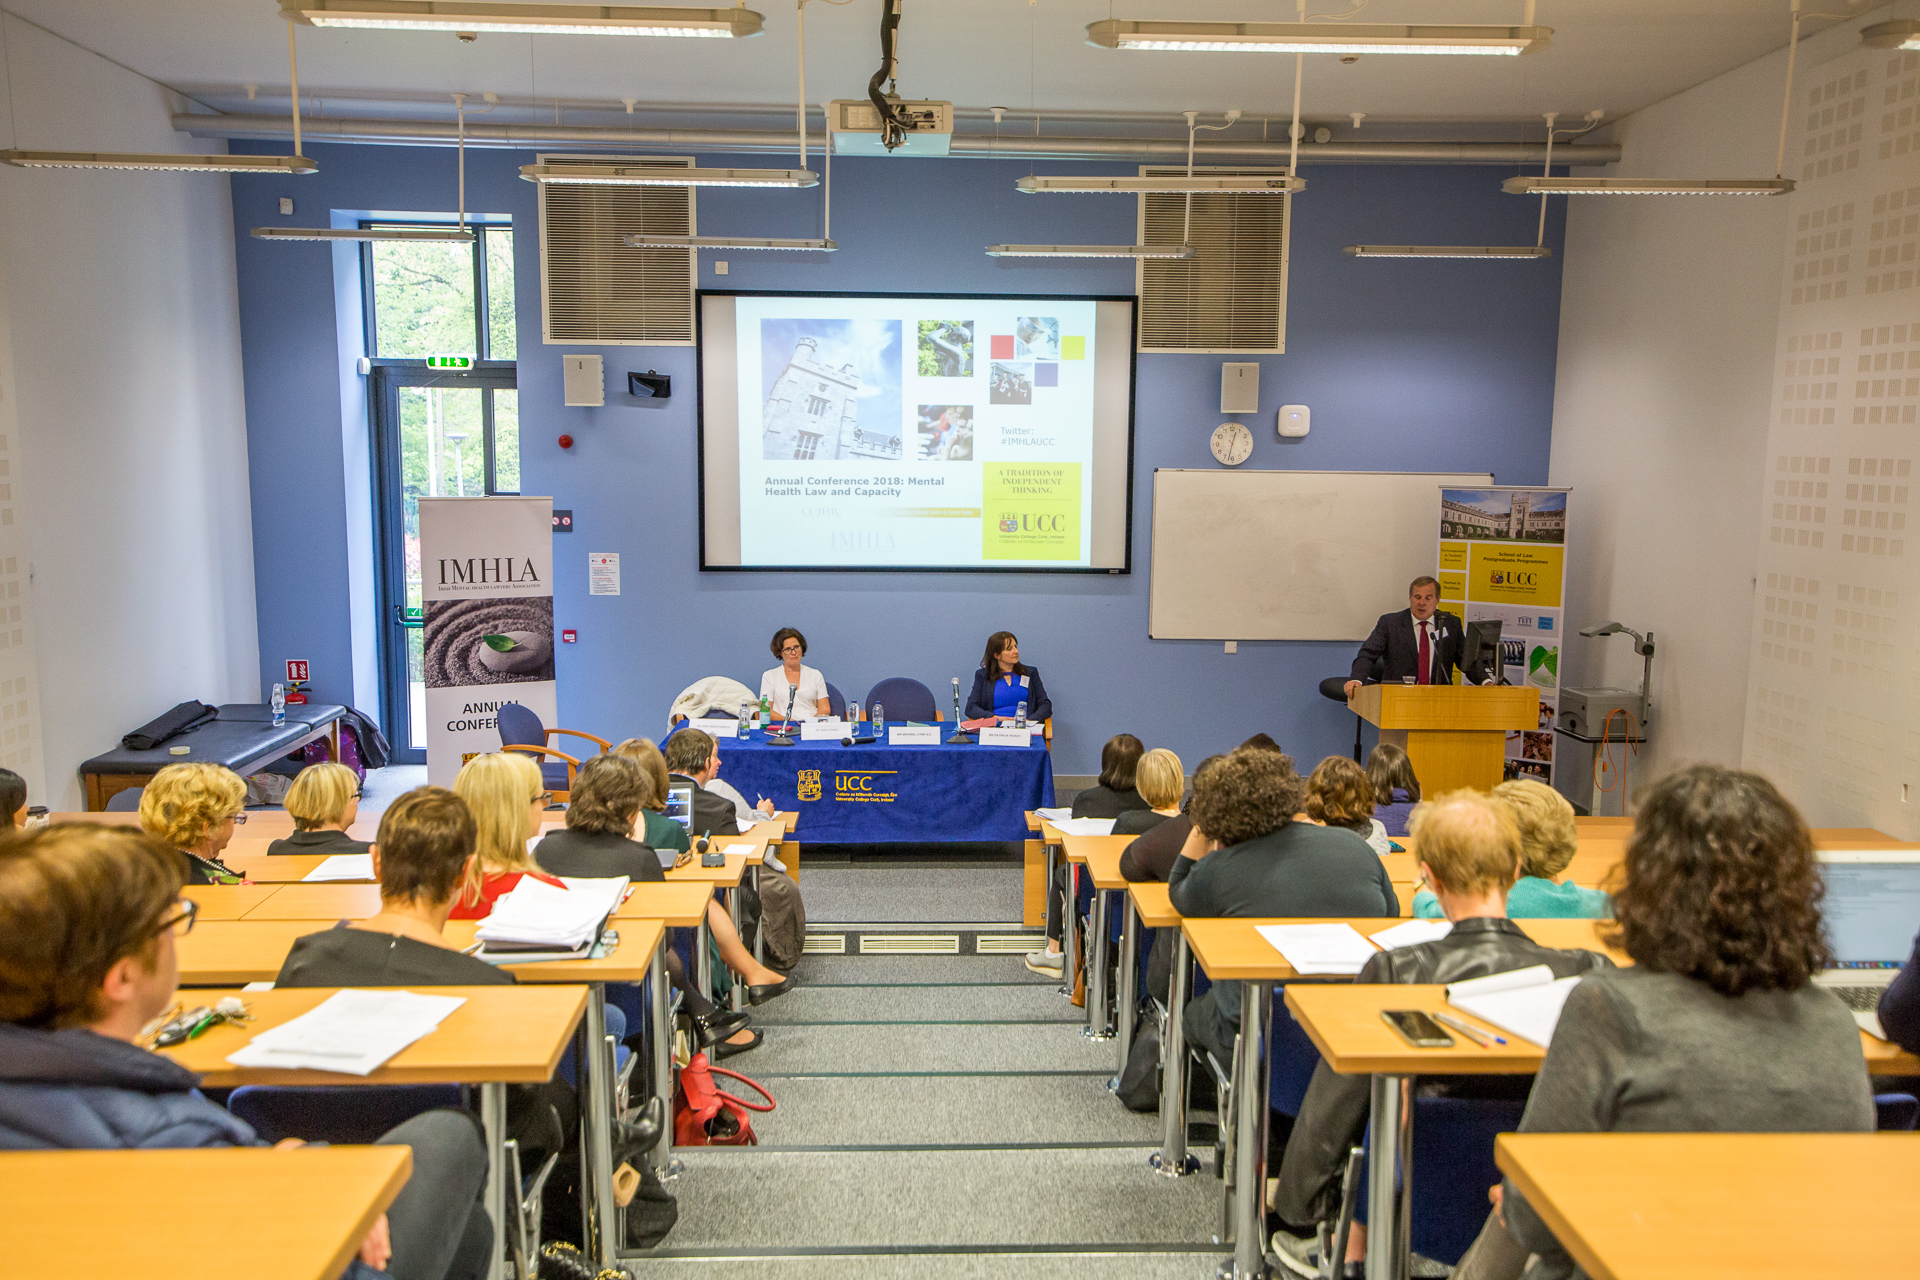 Developments in Mental Health Law Discussed at School of Law Conference